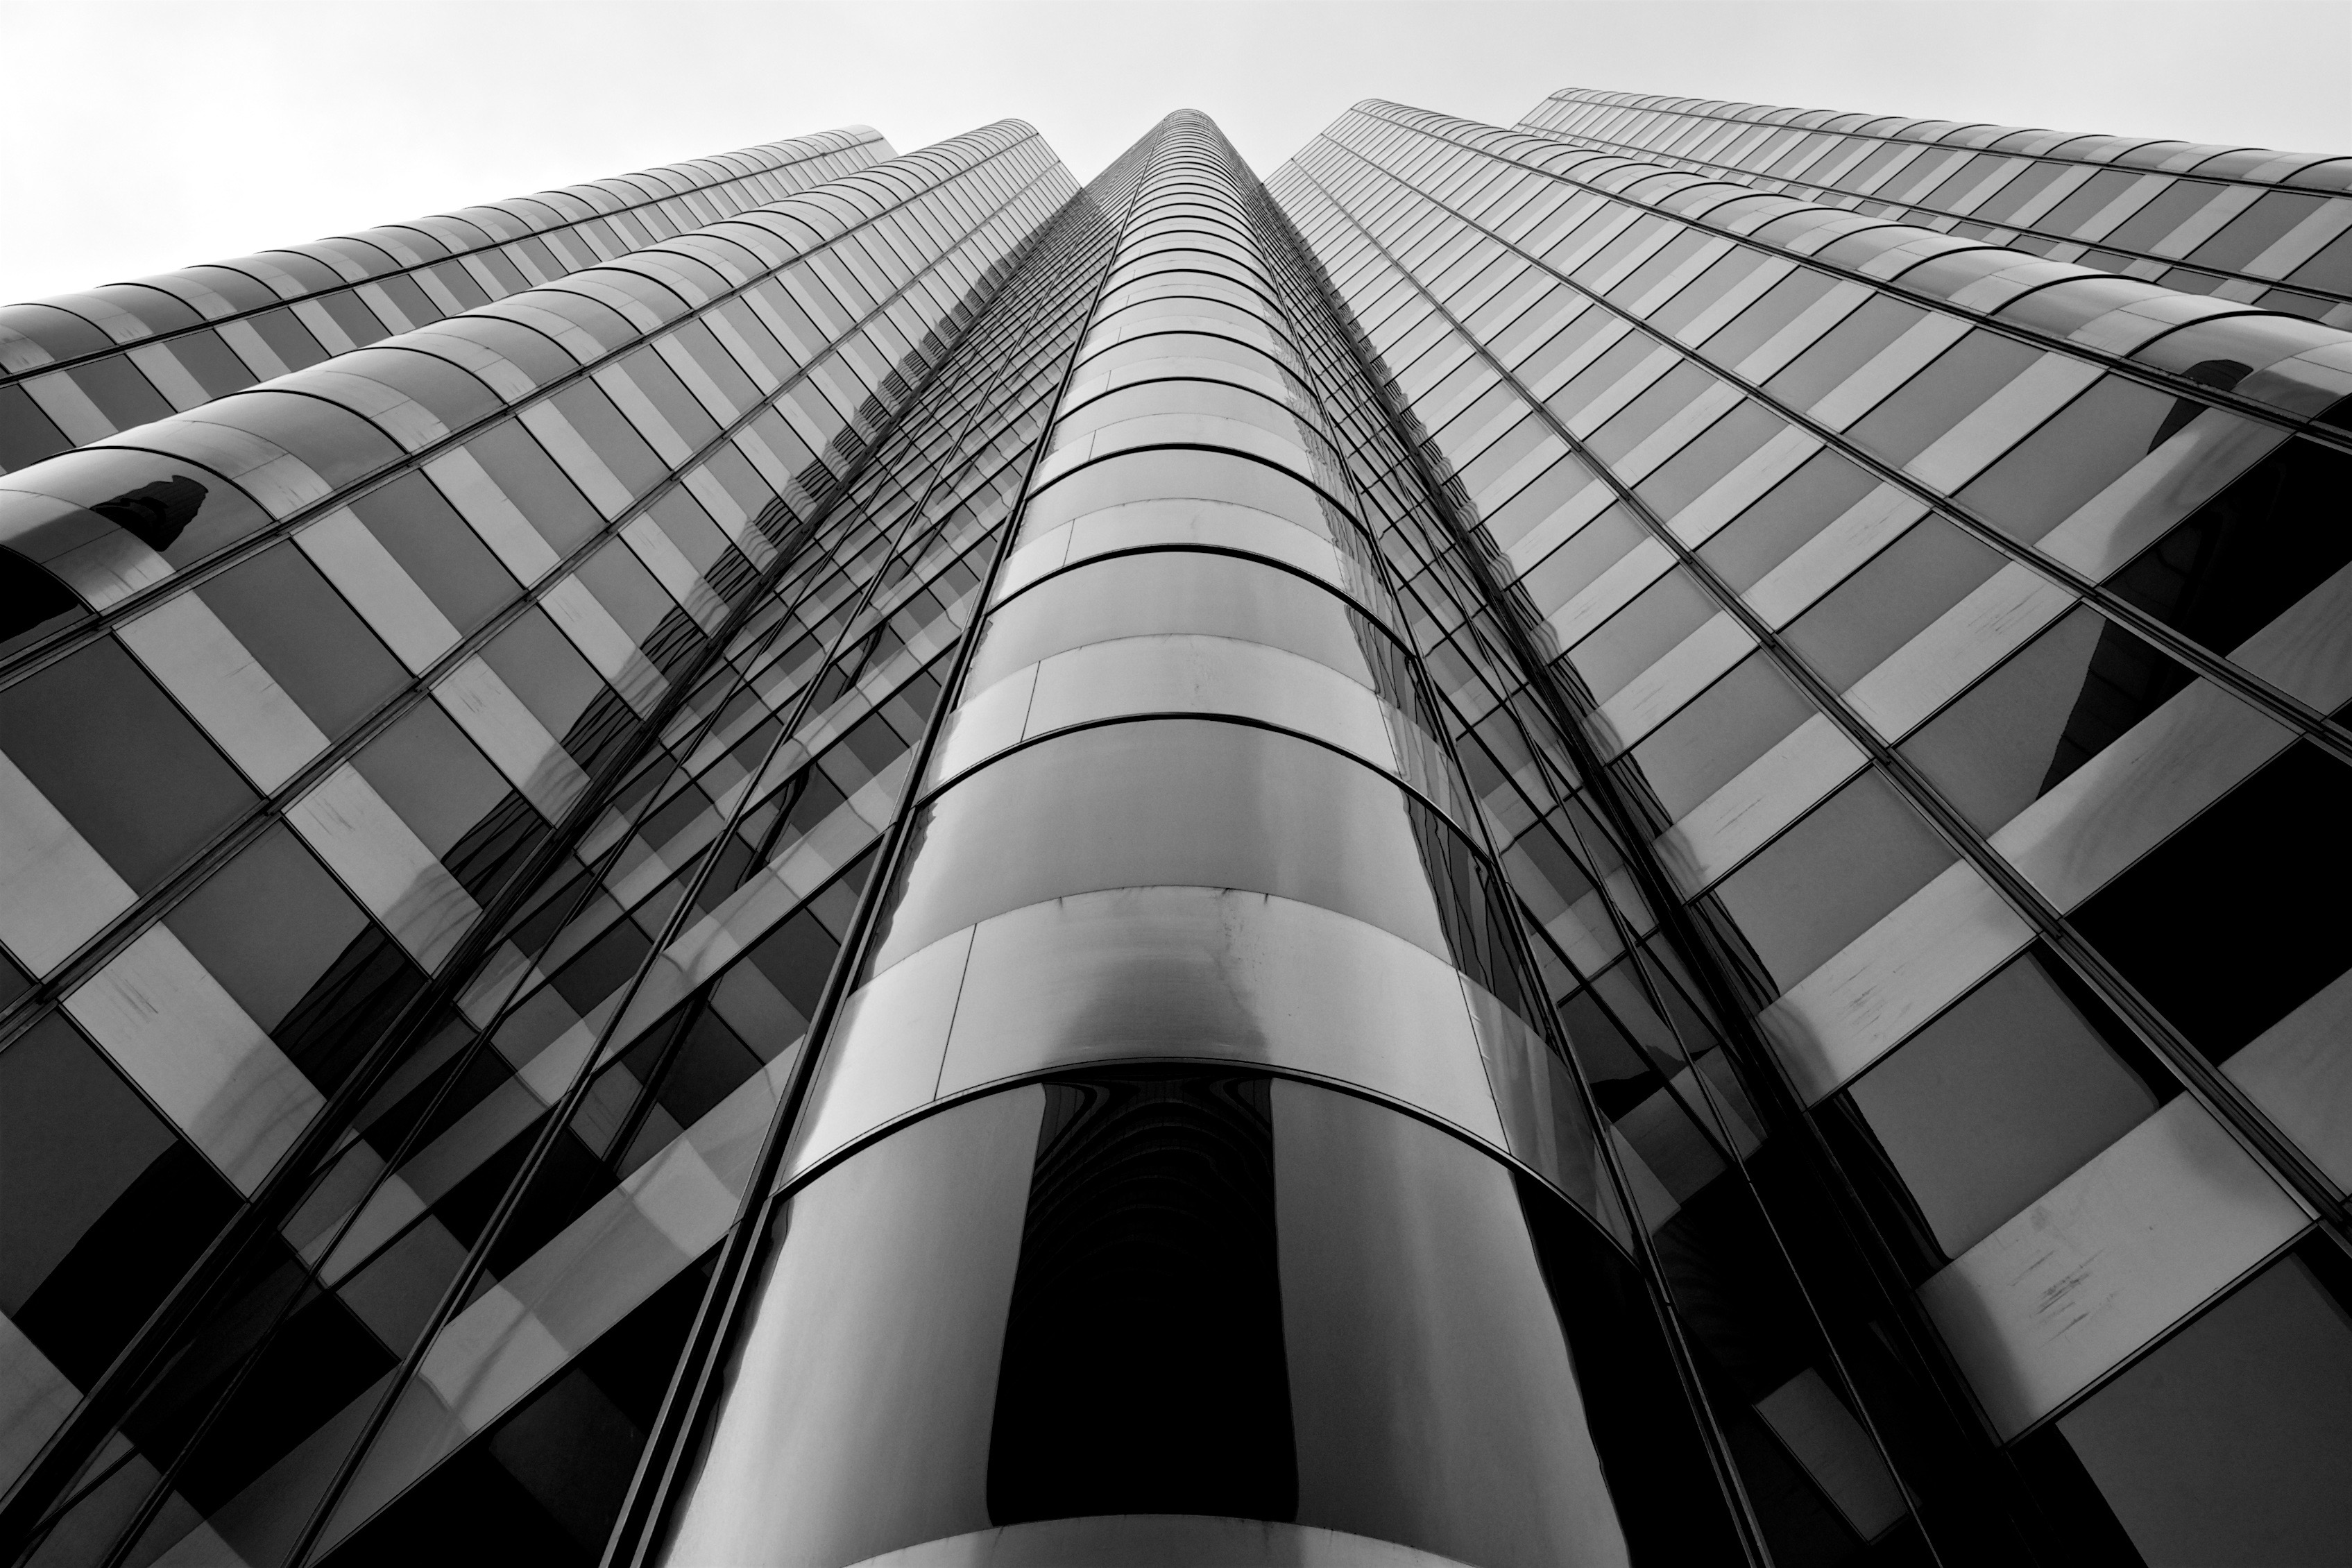 Free Images : black and white, architecture, structure, glass ...